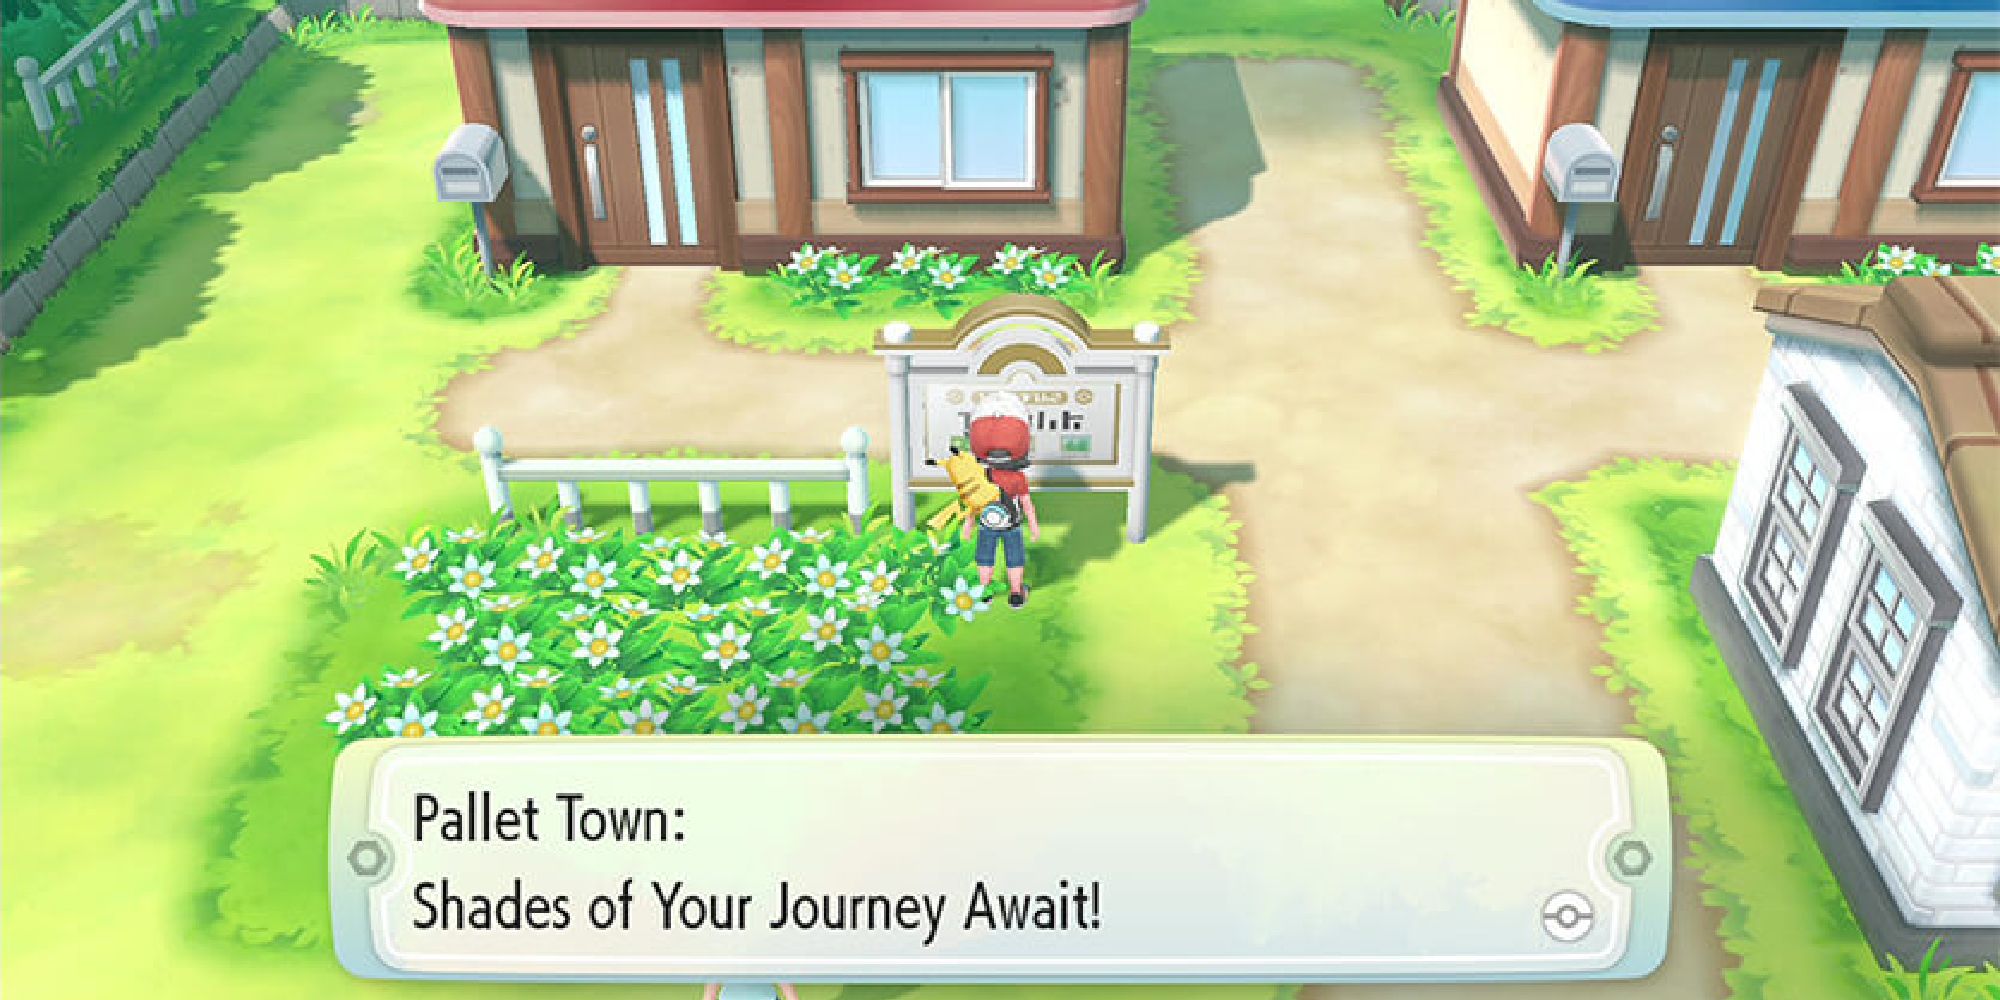 A sign in Pallet Town from Pokemon Let's Go Pikachu & Eevee